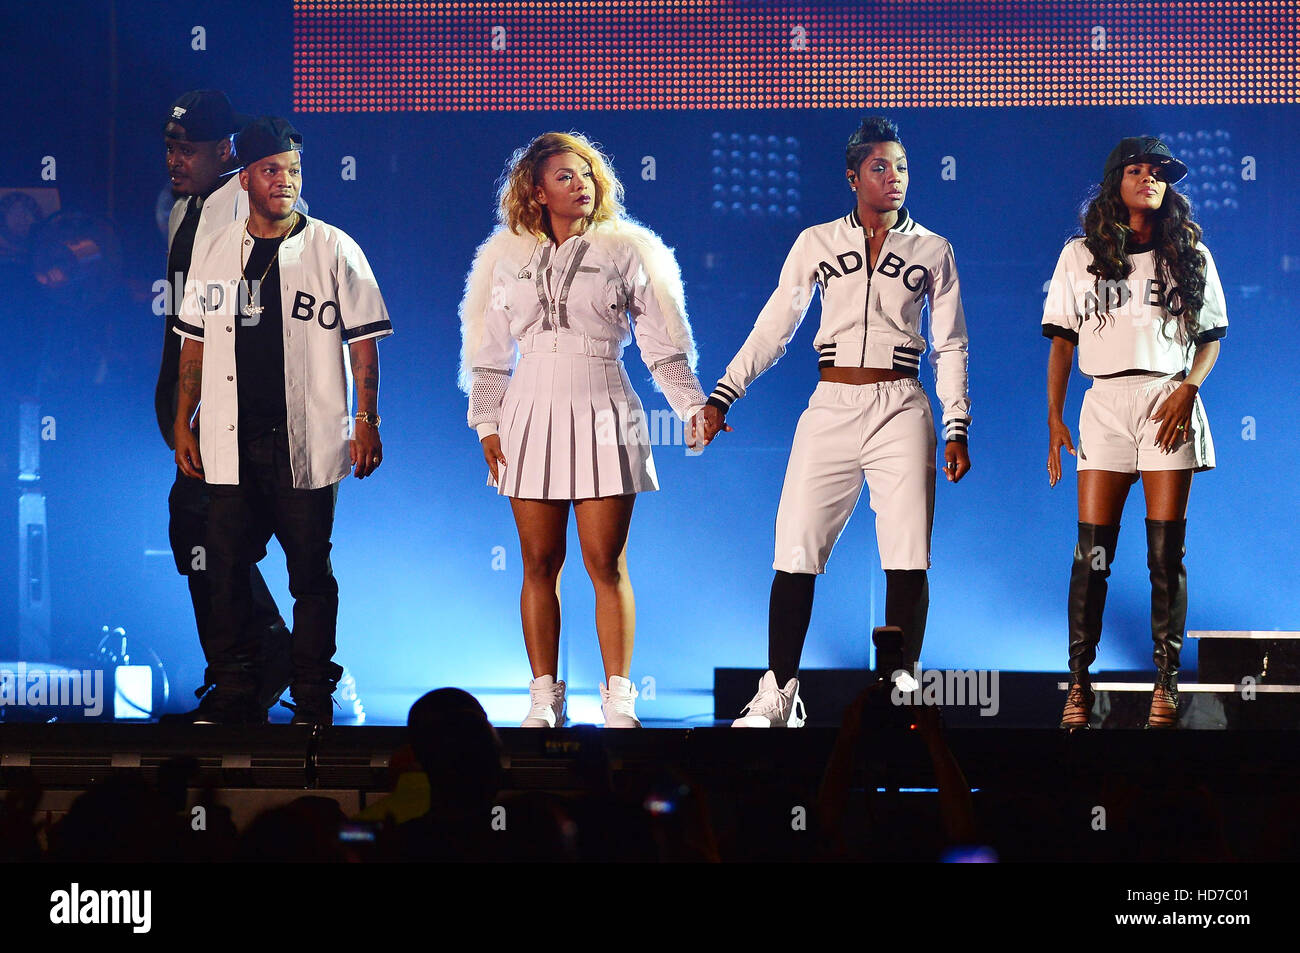 Sheek Louch, Keisha Spivey Epps, Pamela Long and Kima Raynor perform onstage during the Bad Boy Family Reunion Tour at the American Airlines Arena in Miami, Florida.  Featuring: The Lox, Total, Sheek Louch, Keisha Spivey Epps, Pamela Long, Kima Raynor Whe Stock Photo